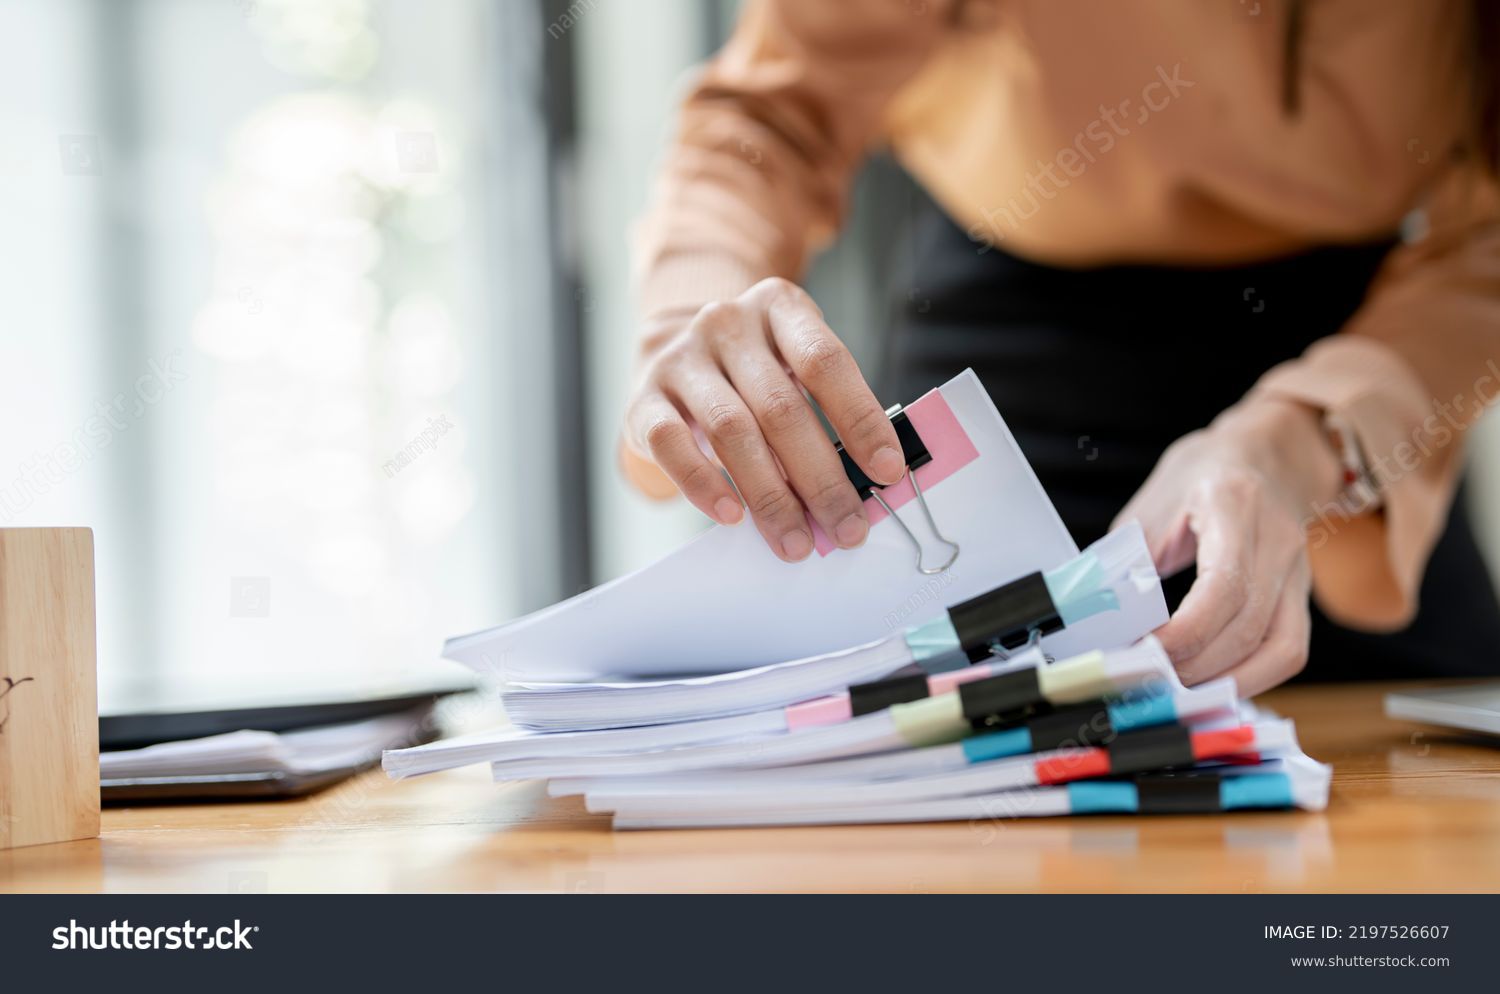 Businesswoman hands working in Stacks of paper files for searching and checking unfinished document achieves on folders papers at busy work desk office #2197526607